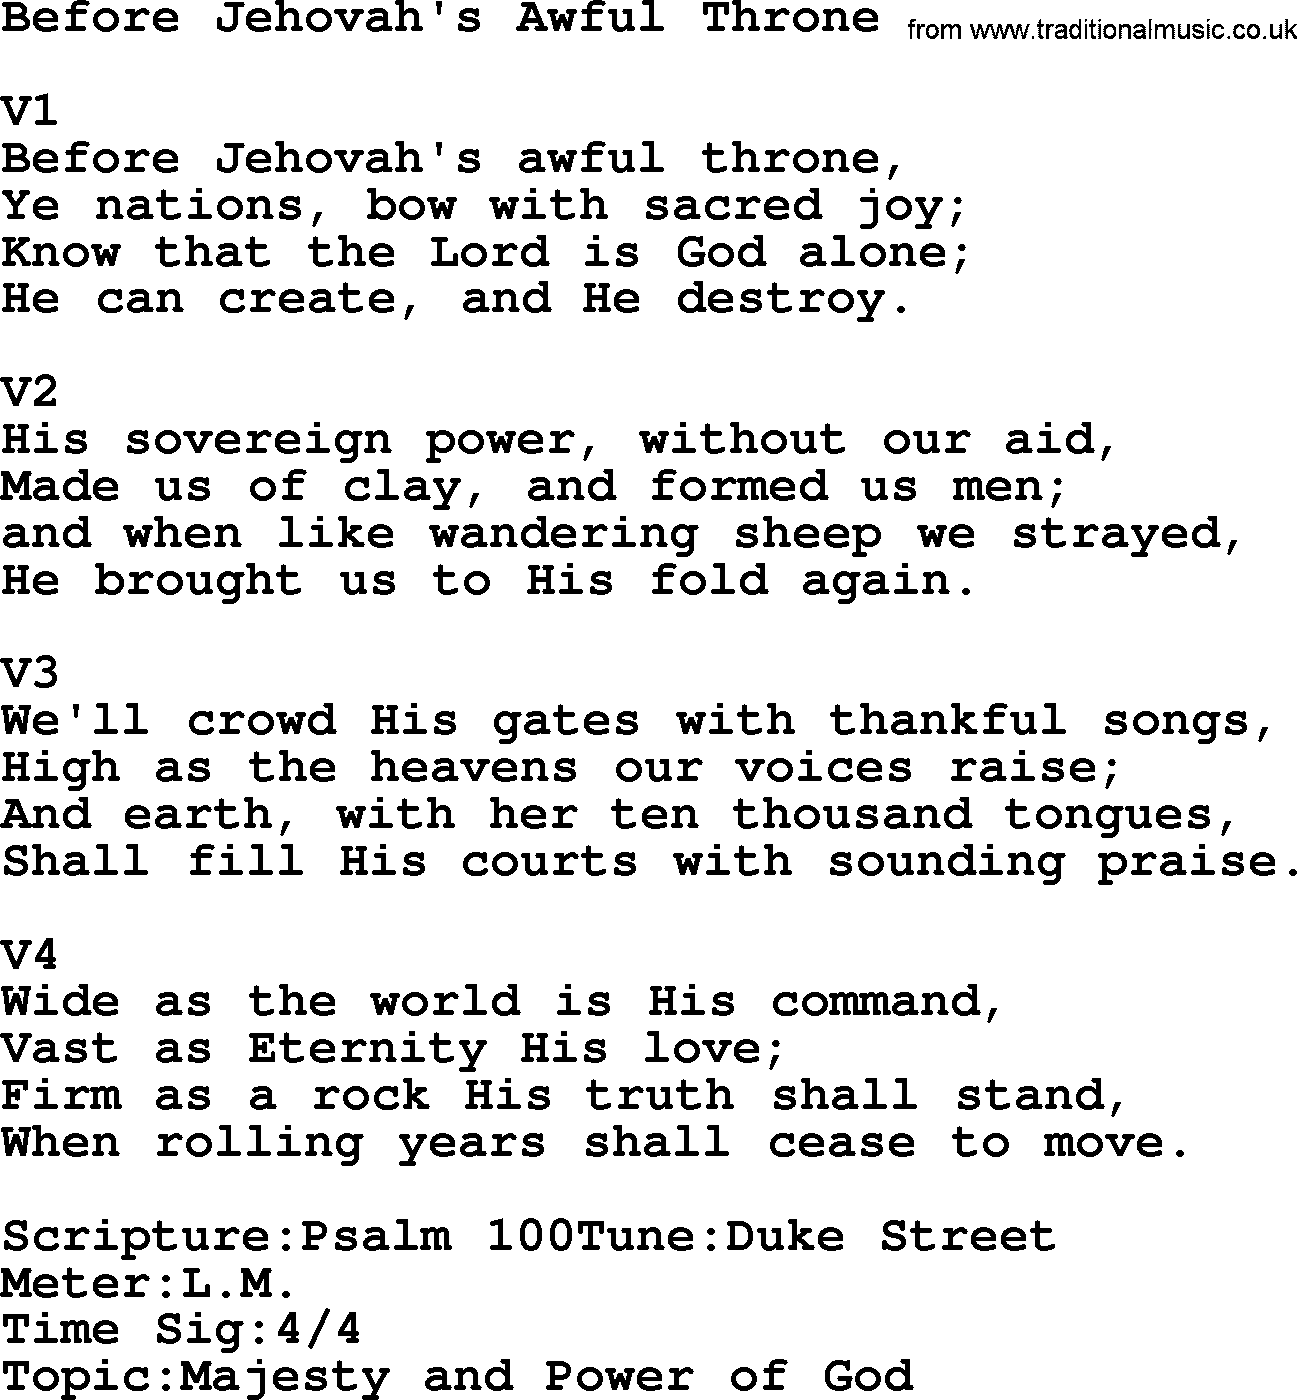 Adventist Hynms collection, Hymn: Before Jehovah's Awful Throne, lyrics with PDF